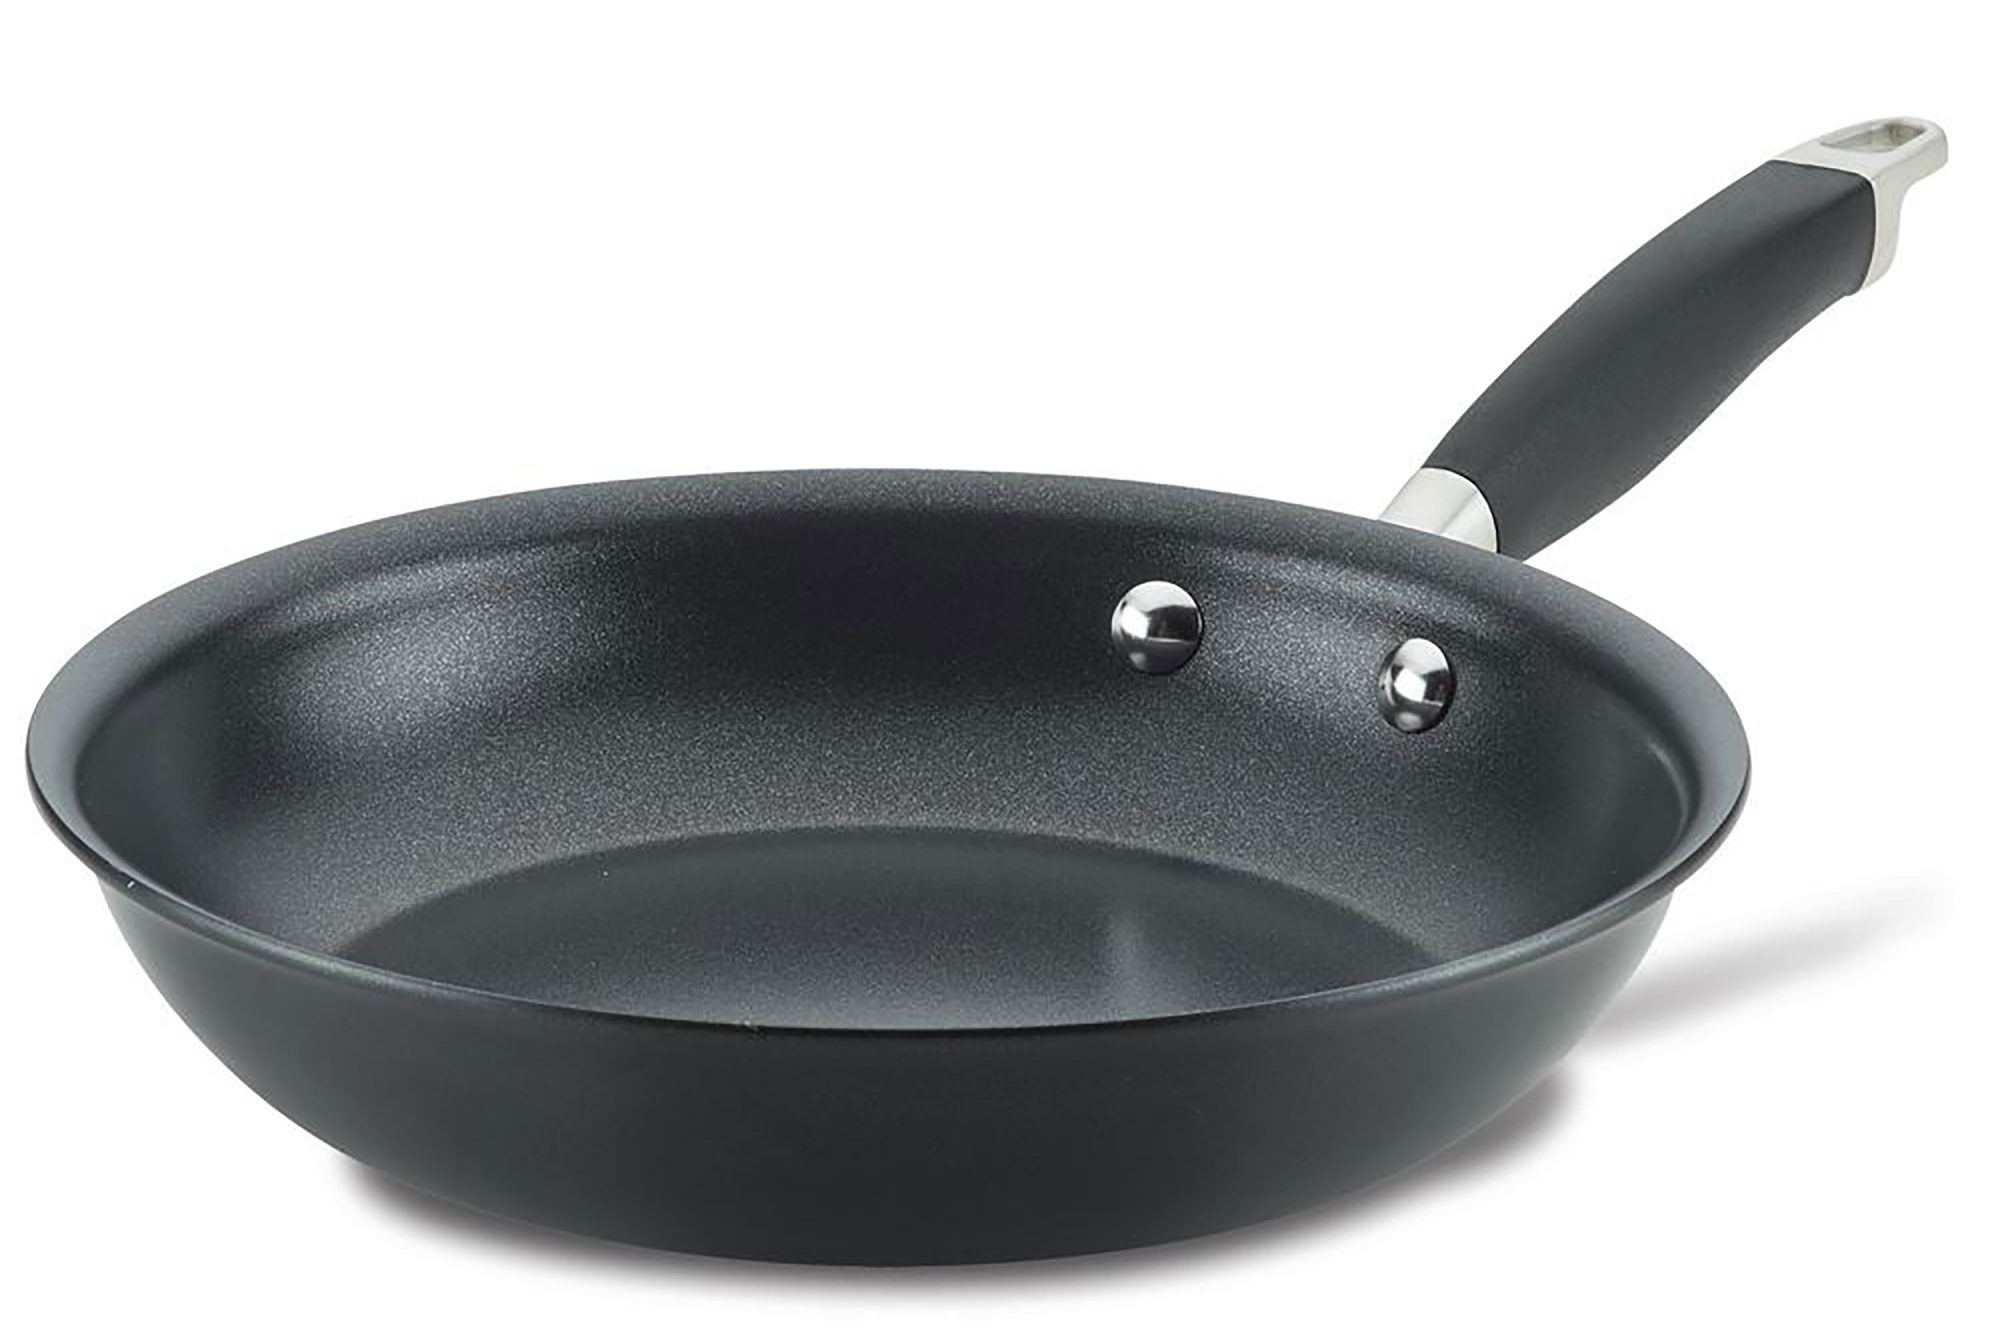 What Is The Best Non Stick Pan Coating